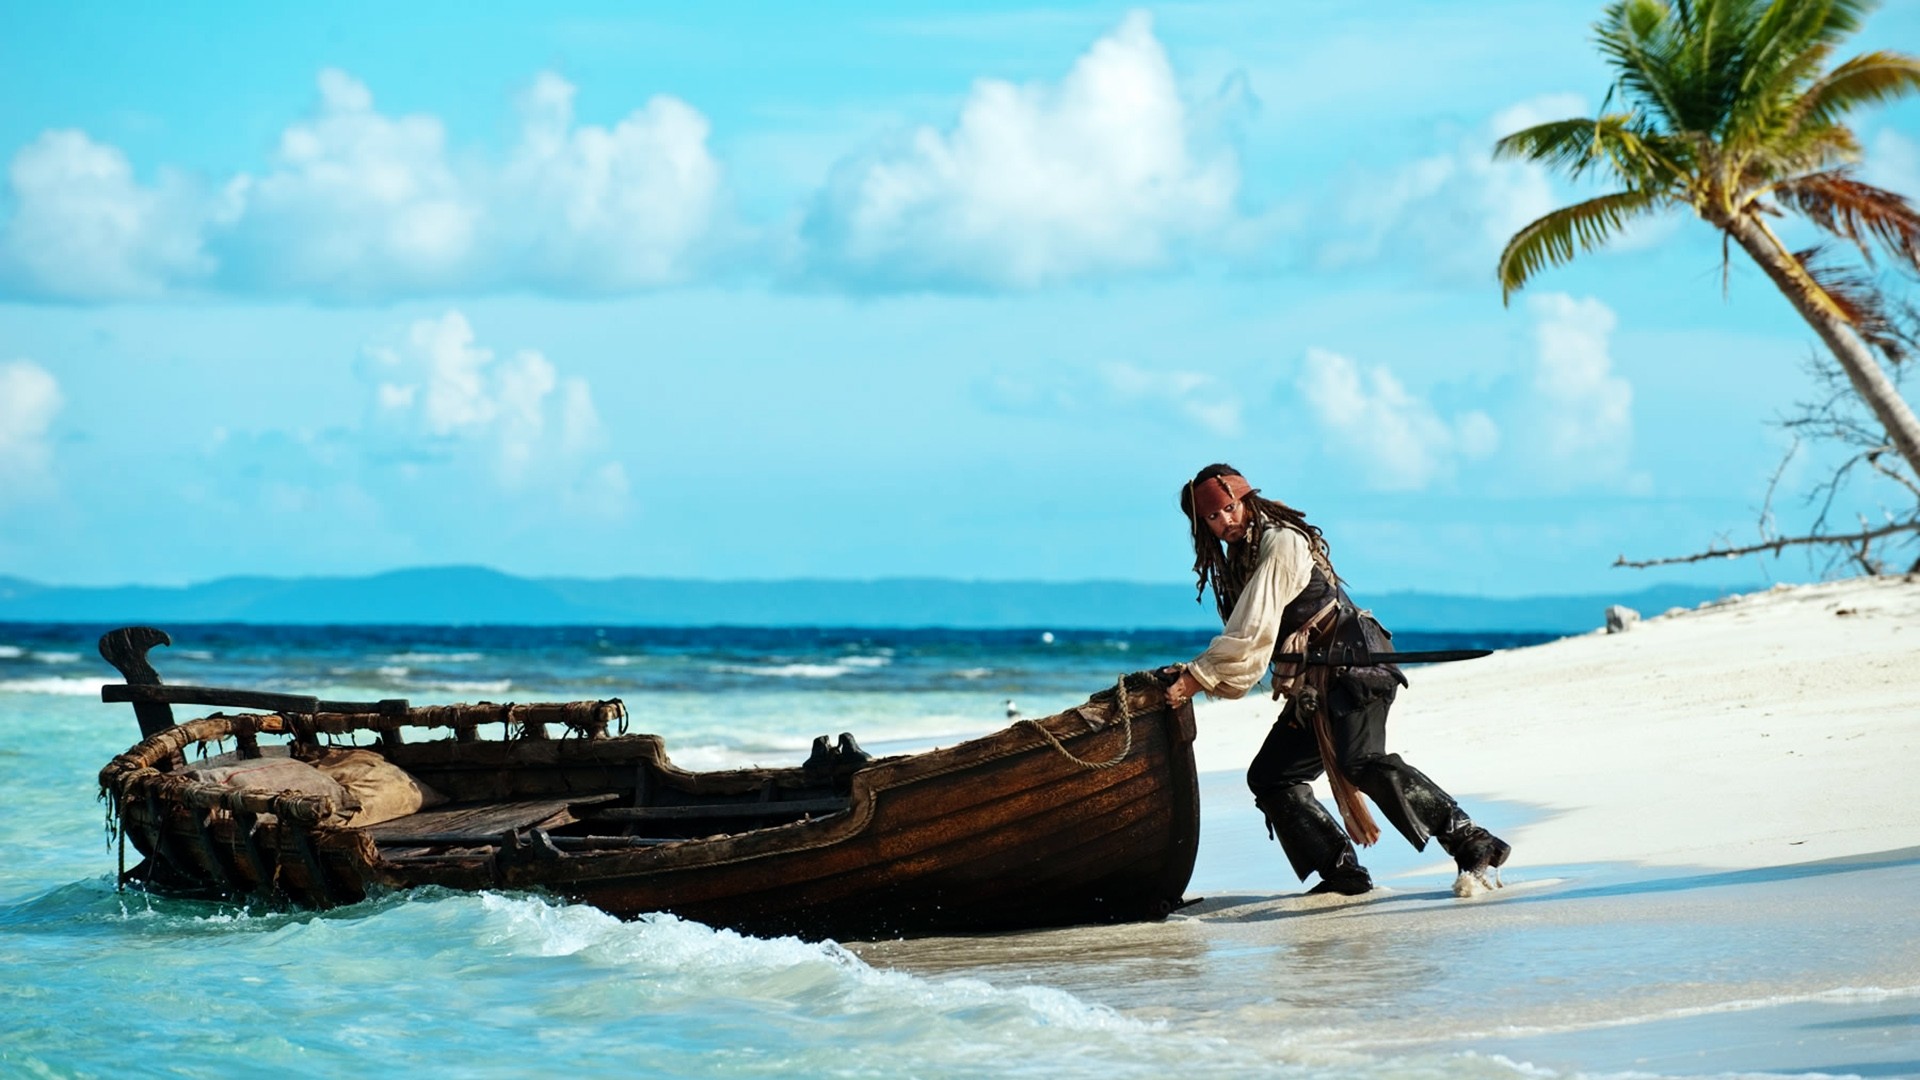 pirates, Of, The, Caribbean, On, Stranger, Tides, Johnny, Depp, Pirate, Fantasy, Humor, Funny, Comedy, Vehicles, Boats, Ship, People, Men, Males, Boy, Actor, Nature, Tropical, Sky, Clouds, Landscapes, Beaches, Sa Wallpaper